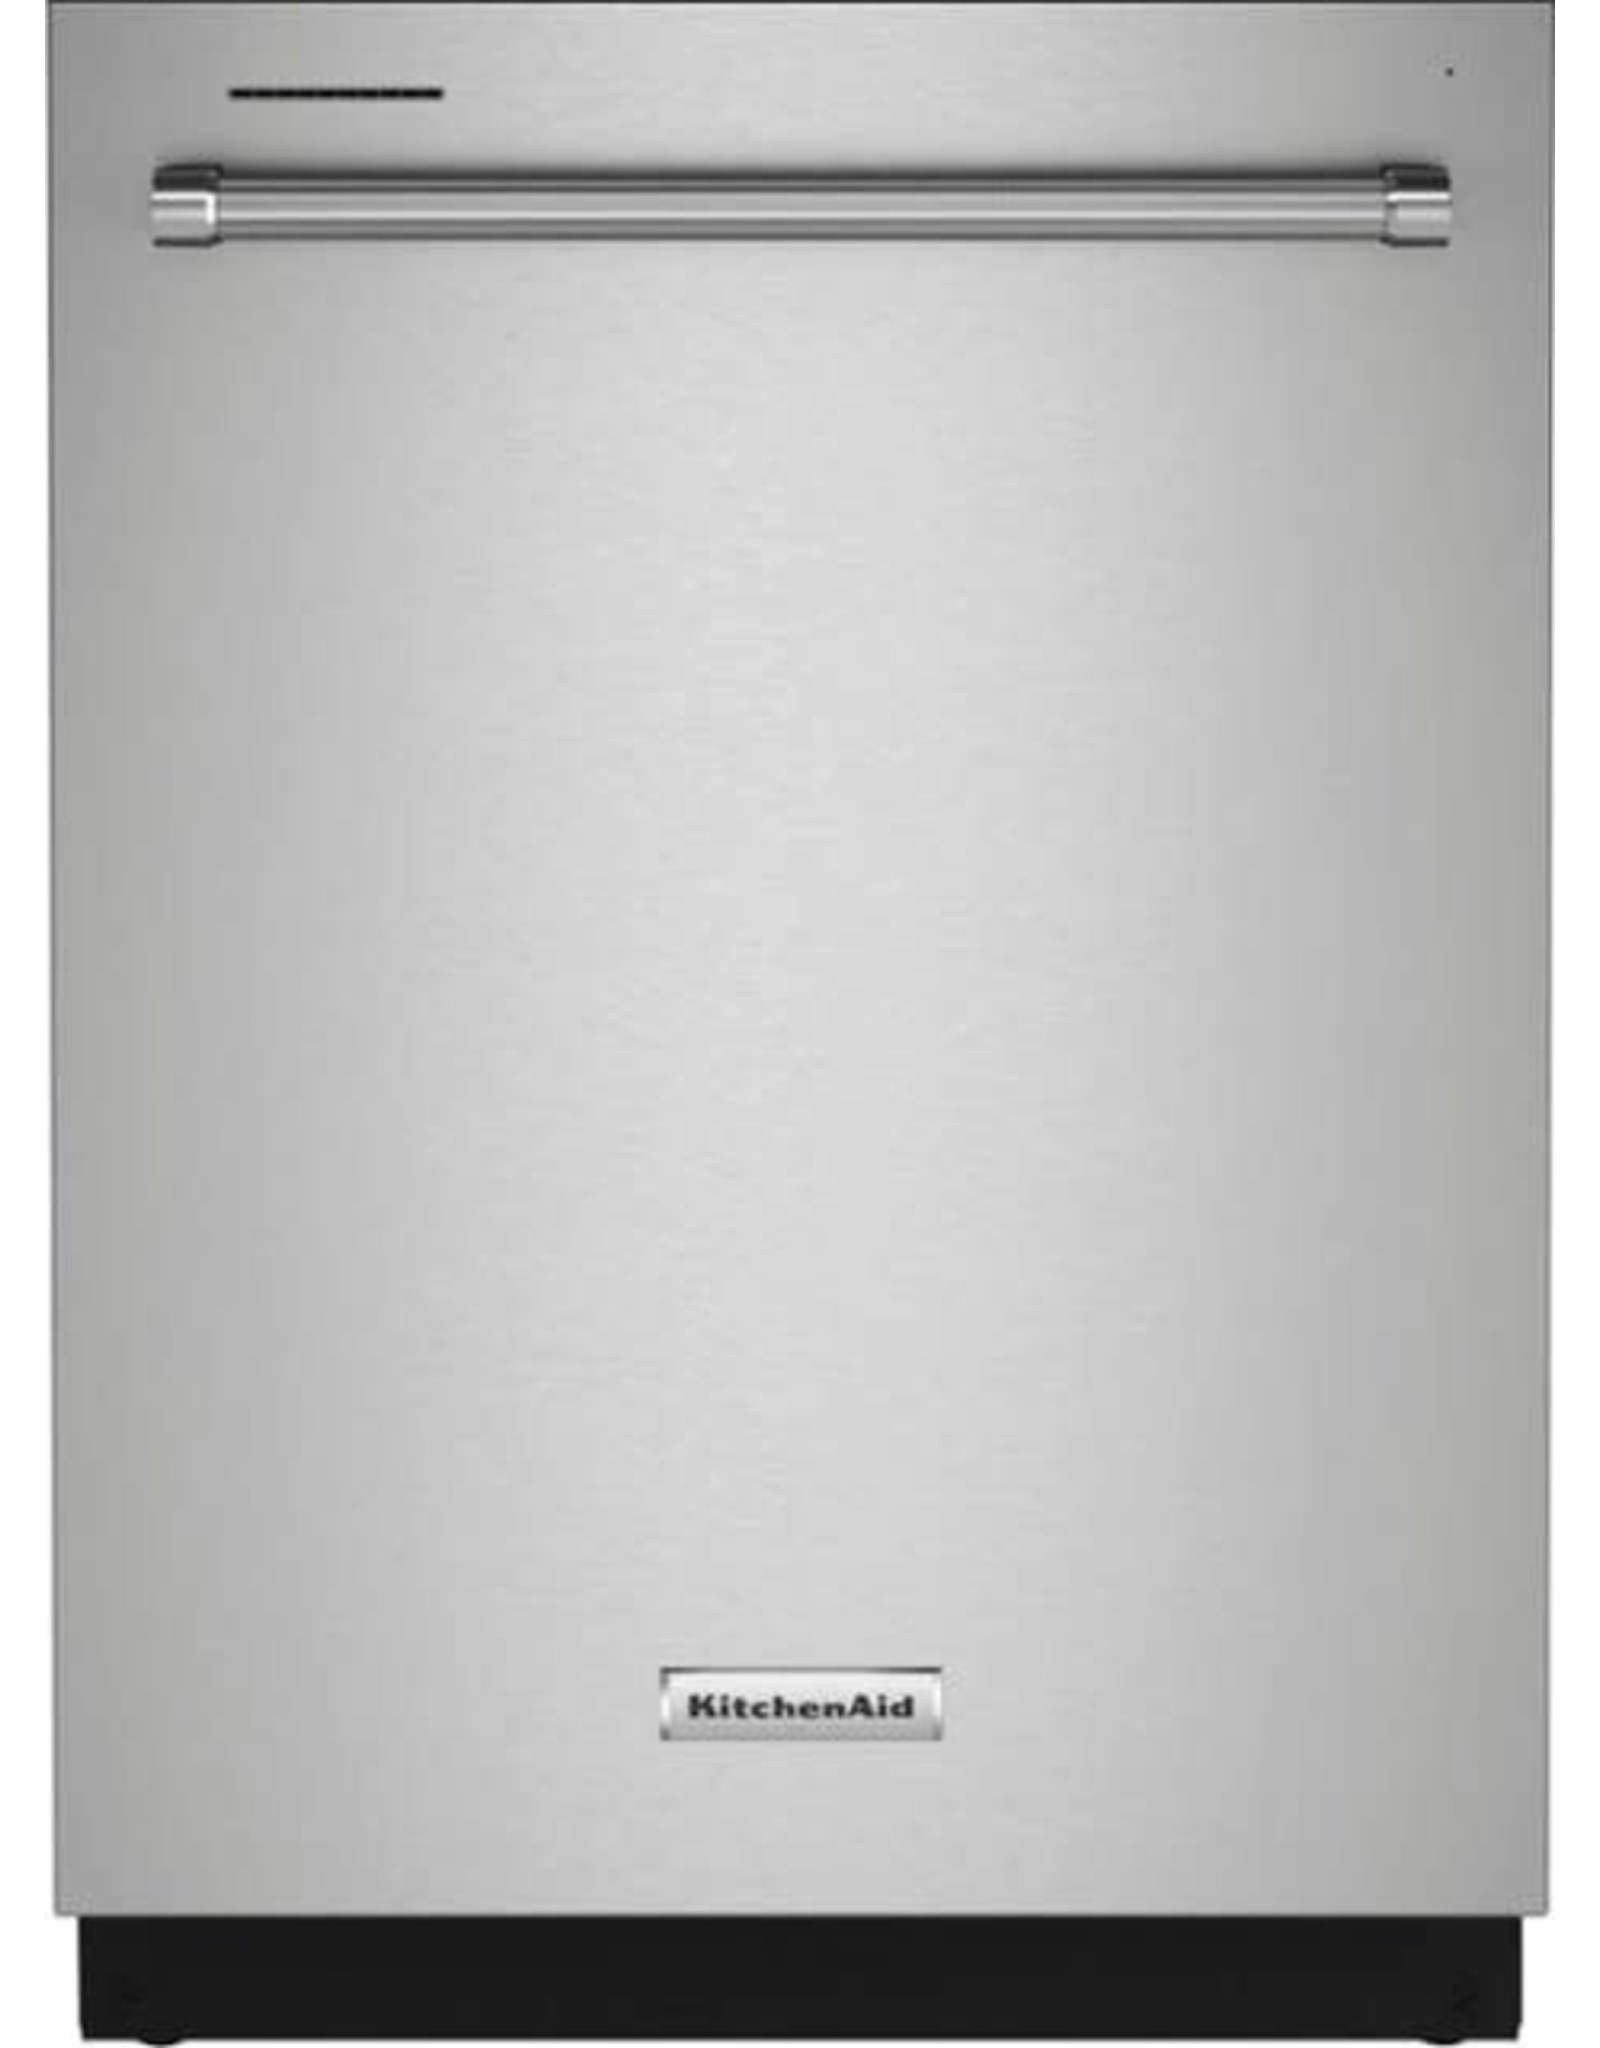 KDTE204KPS 39 dBA KitchenAid - 24" Top Control Built-In Dishwasher with Stainless Steel Tub, PrintShield Finish, 3rd Rack,  - Stainless steel